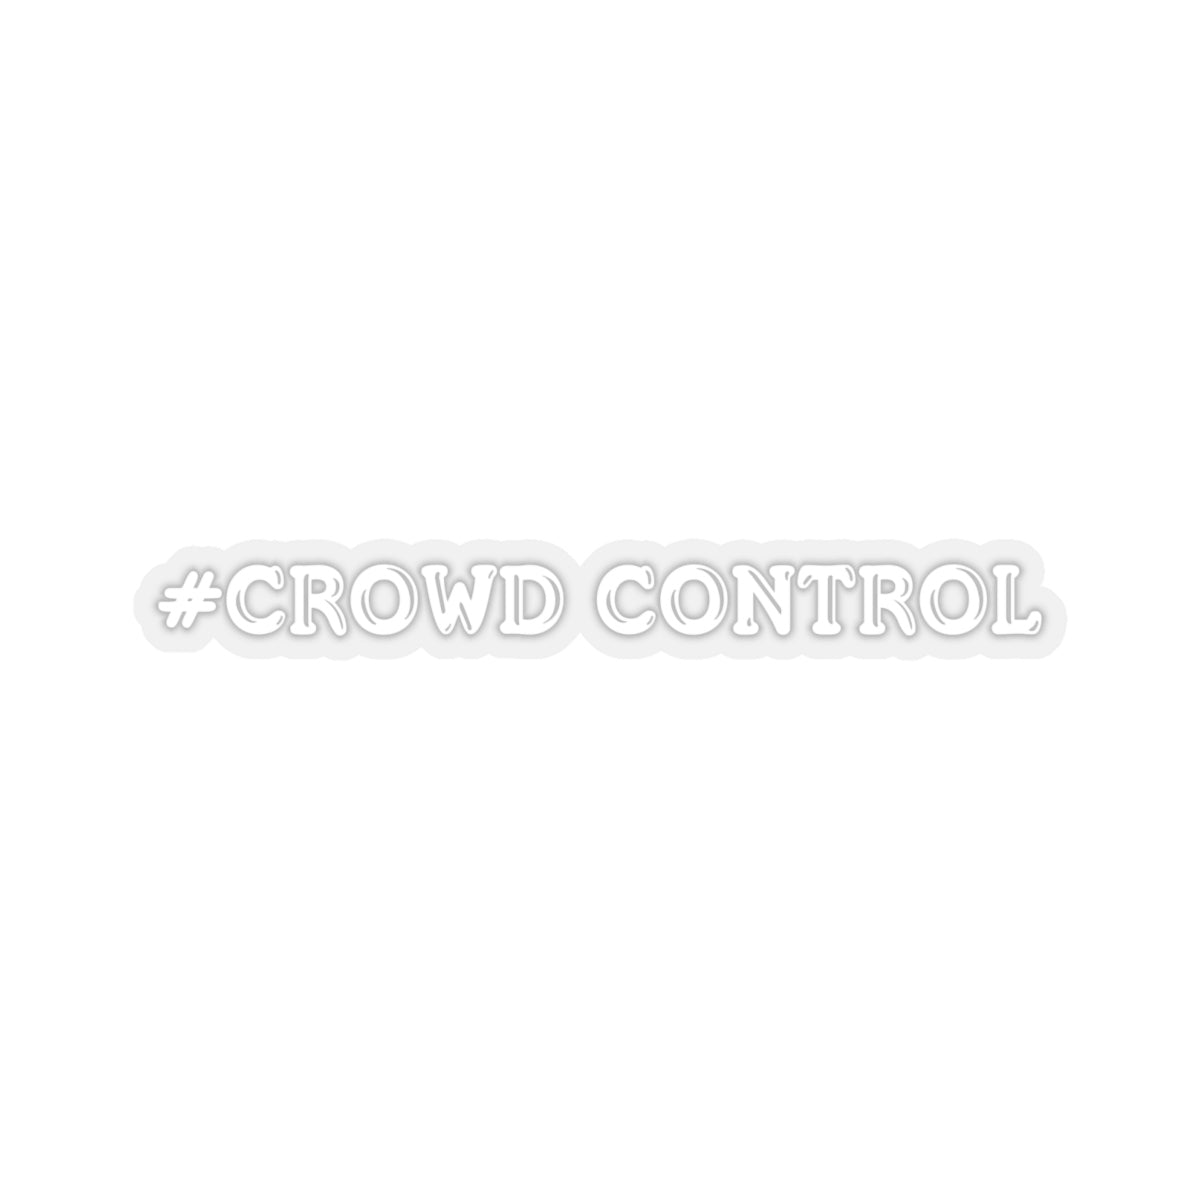 #Crowd Control Decal (White) - 5ohNation